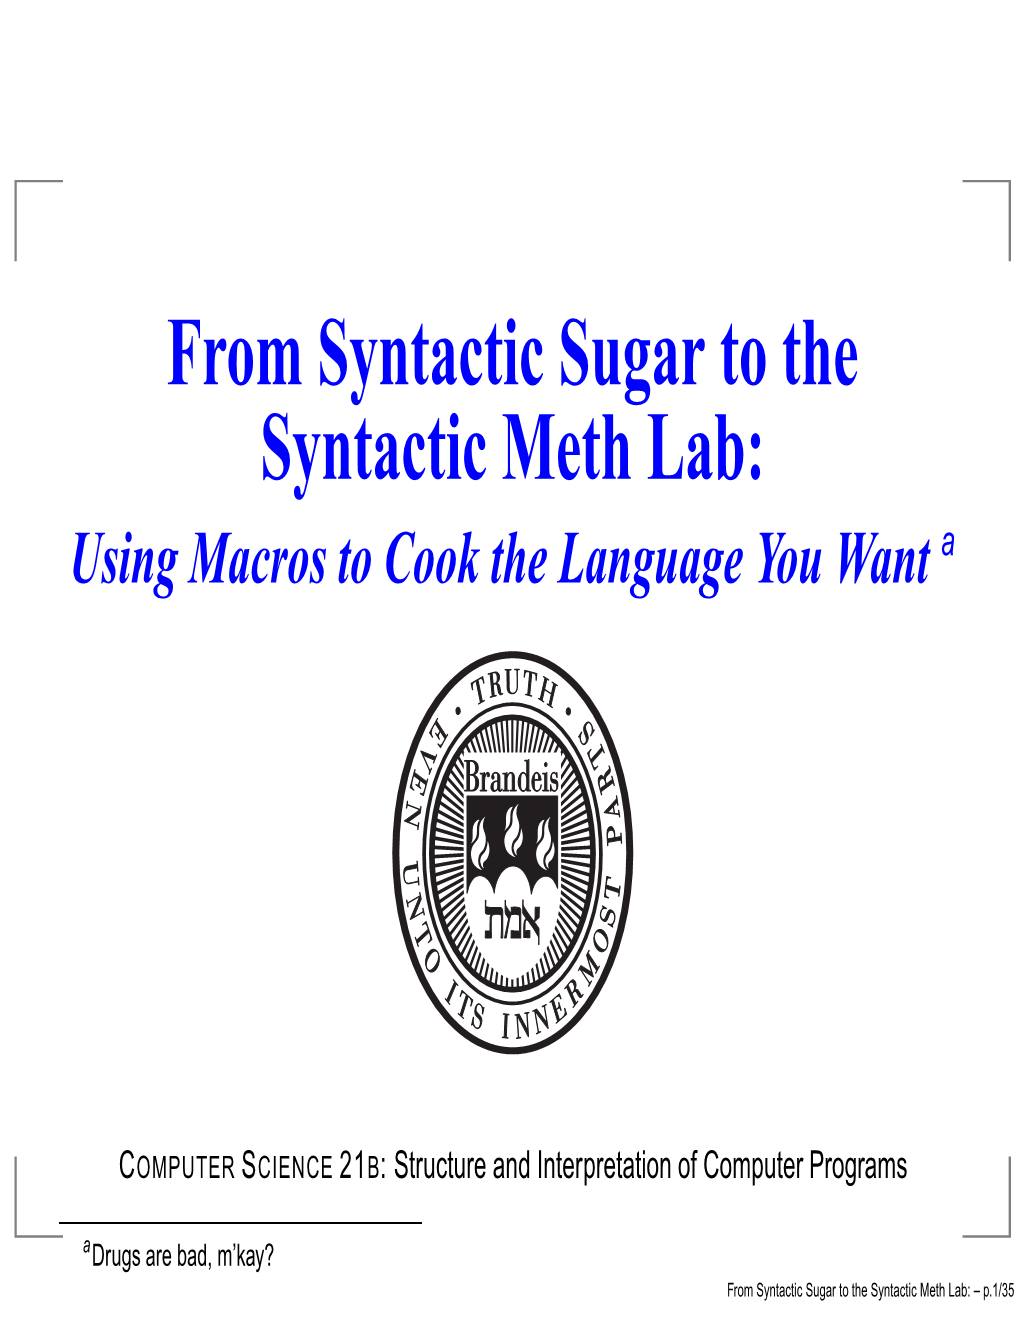 From Syntactic Sugar to the Syntactic Meth Lab: Using Macros to Cook the Language You Want A